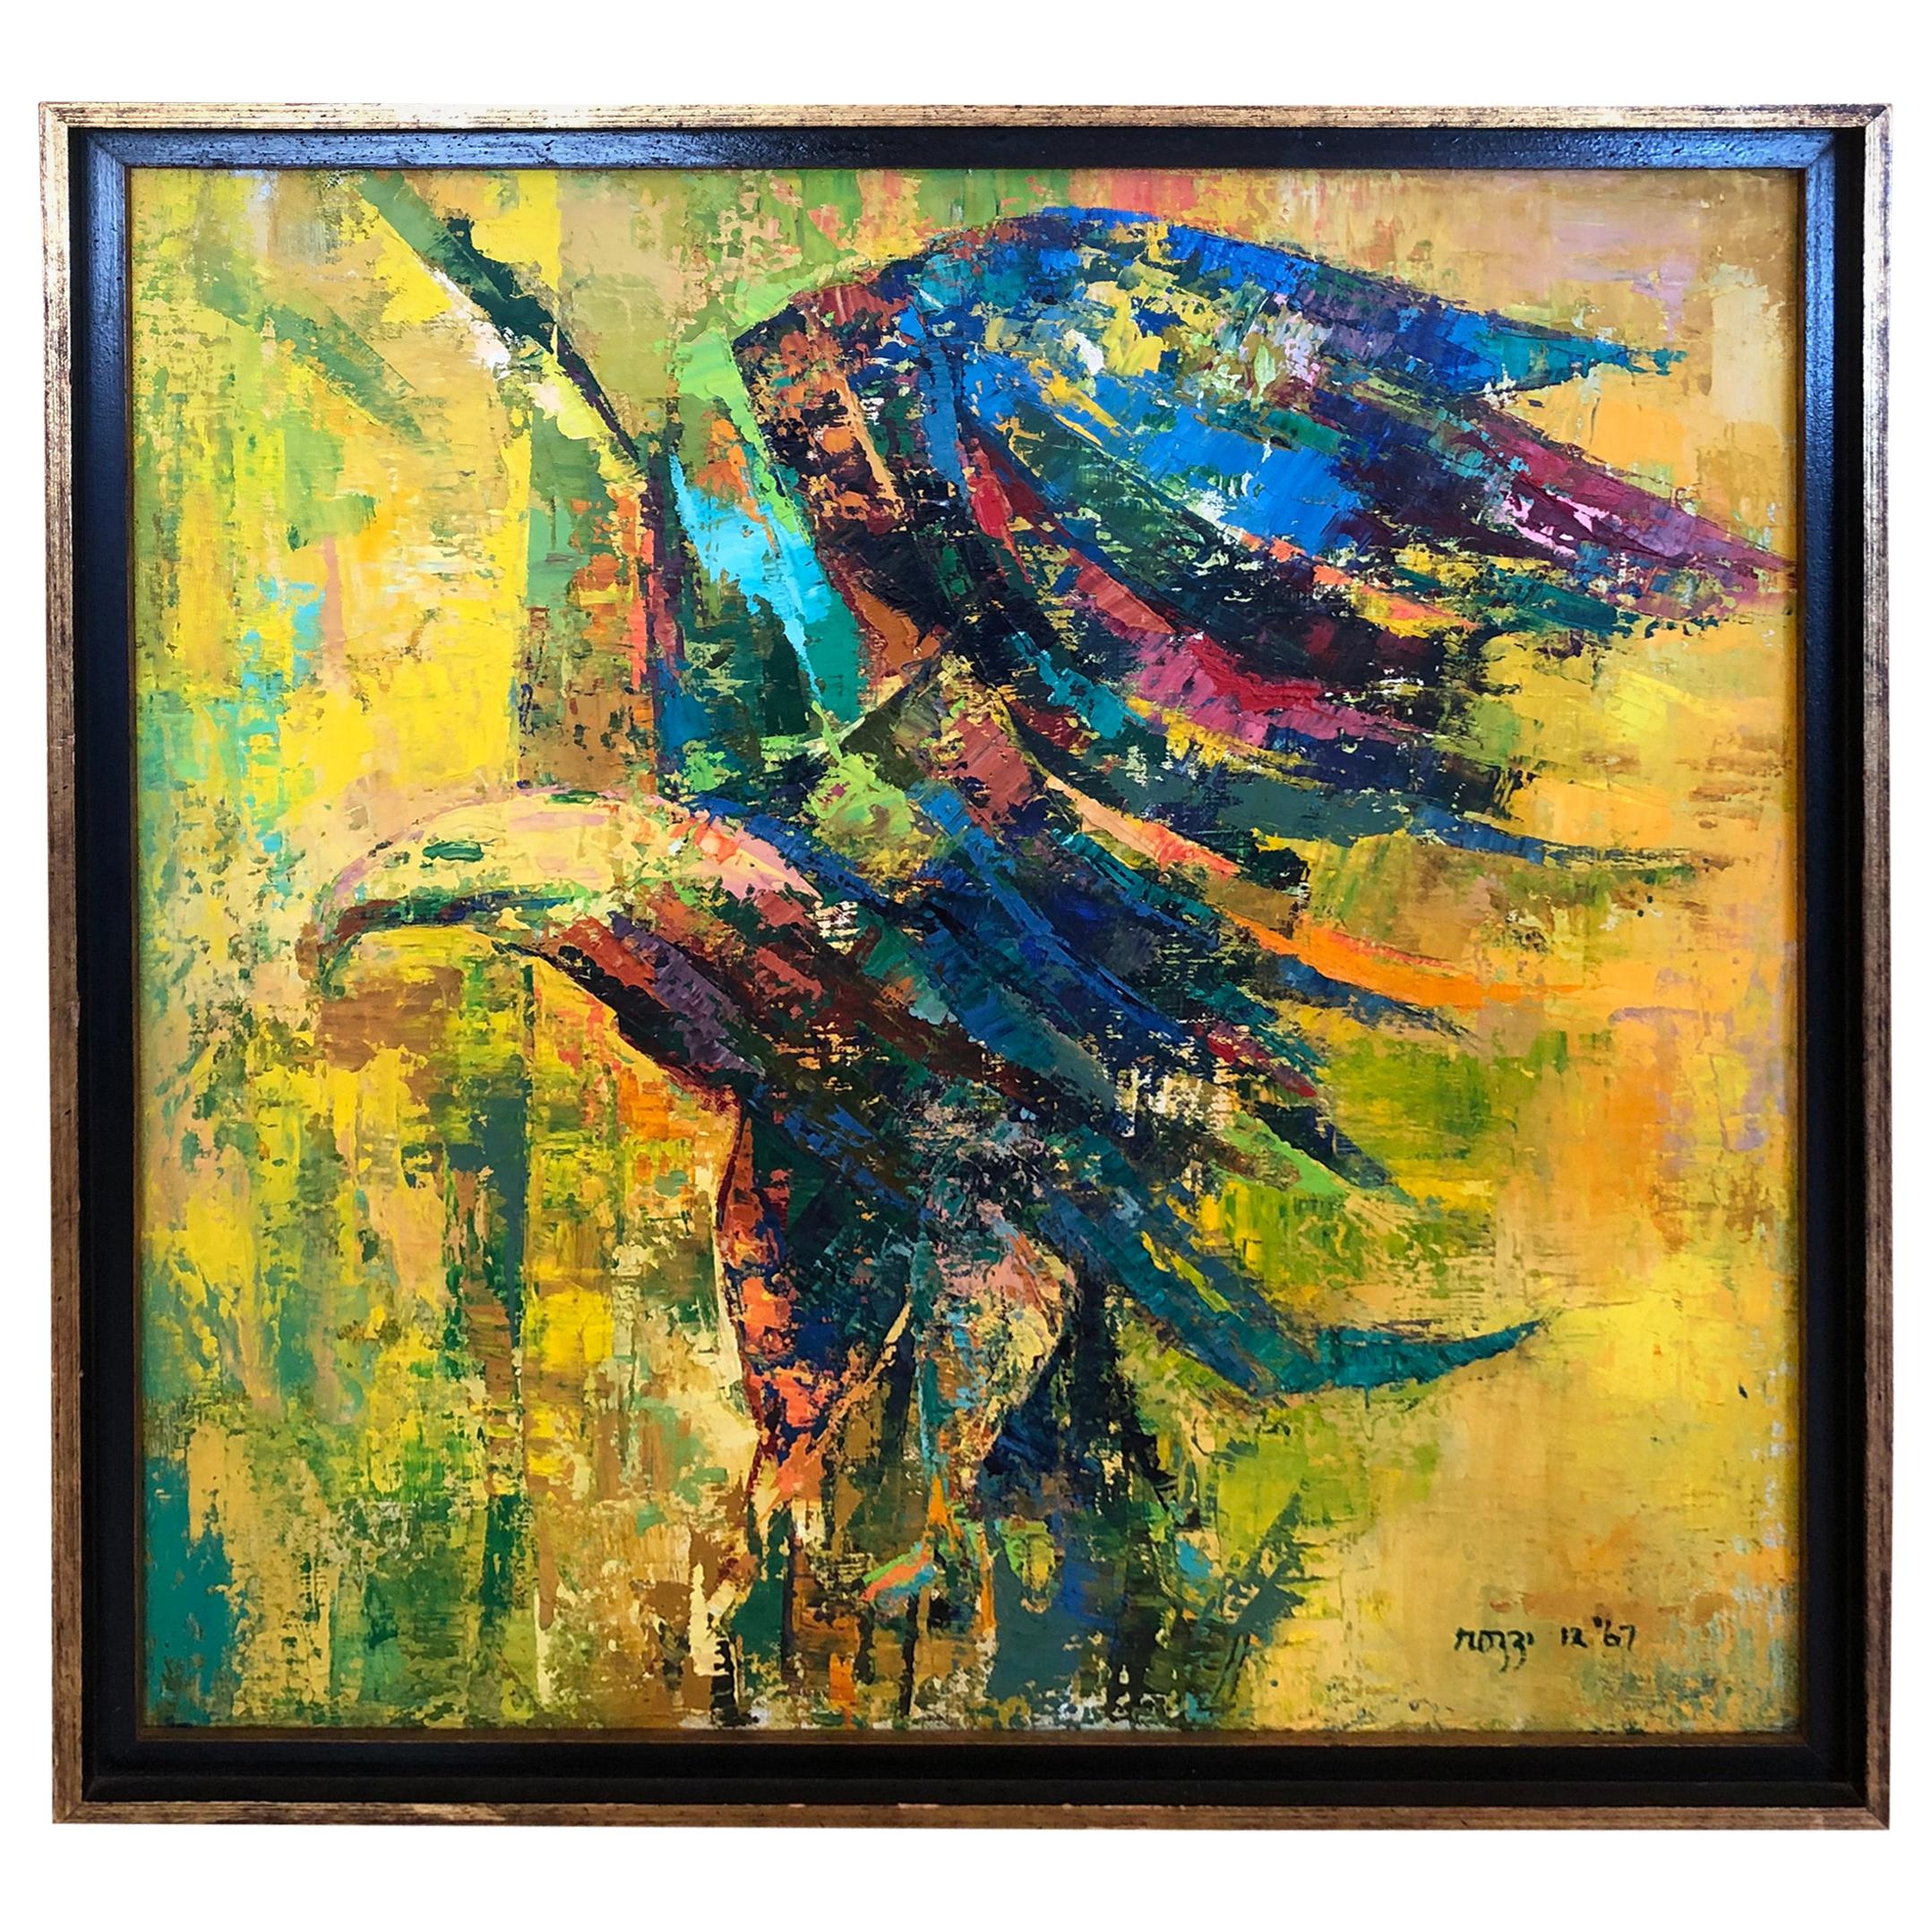 Striking Original Contemporary Oil Painting of Eagle For Sale